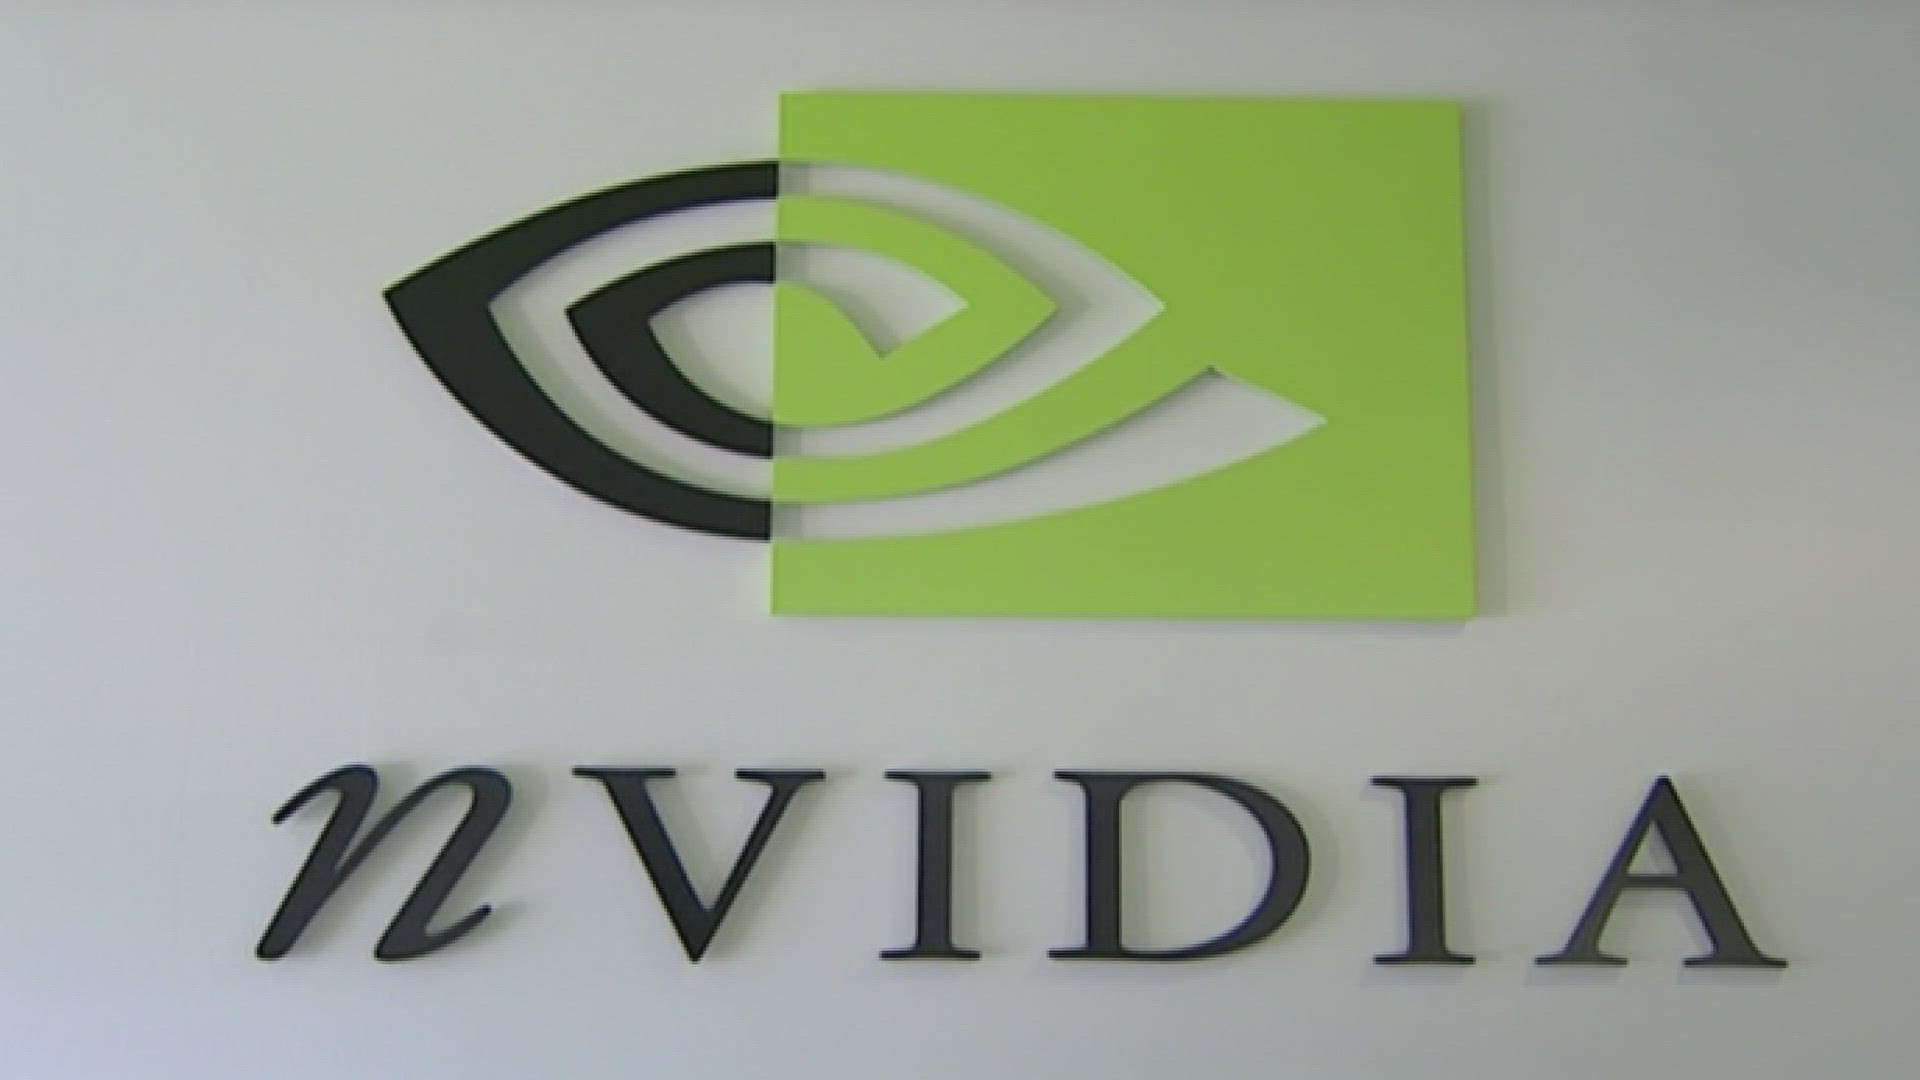 Tech company Nvidia remains on the leading edge of the AI industry, announcing fourth quarter sales tripling. Nestle reported lower than expected revenue in 2023.